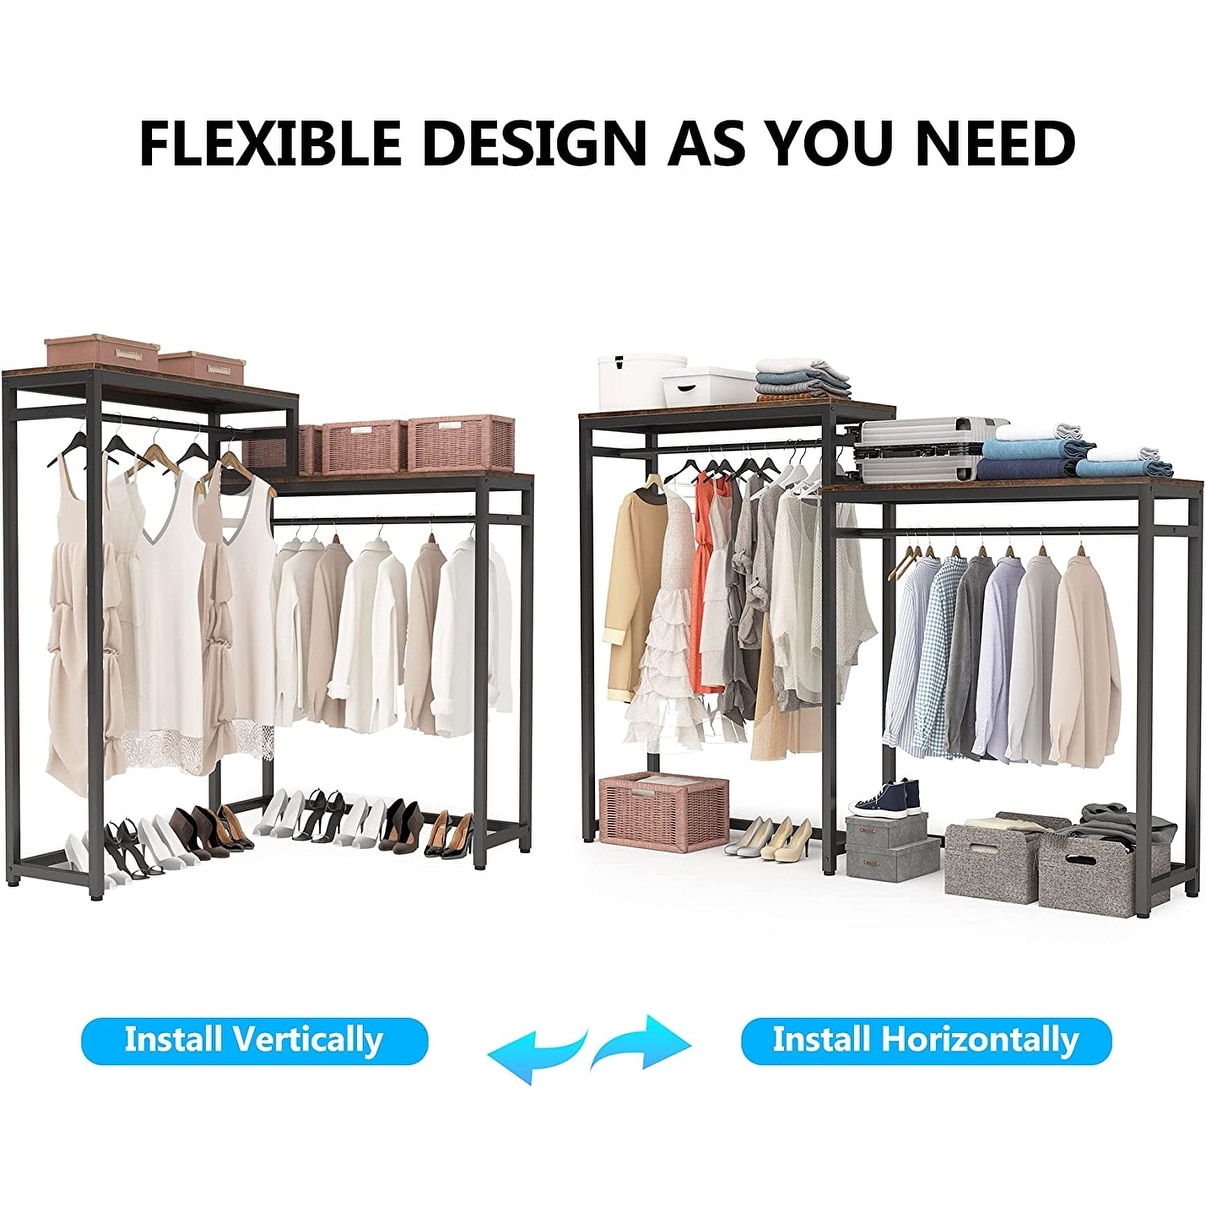 https://ak1.ostkcdn.com/images/products/is/images/direct/d8c9868567713d7168696d96c14de7fe9d6b5f36/Heavy-Duty-Metal-Clothes-Garment-Racks-with-Storage-Shelves-and-Double-Hanging-Rod%2CFree-Standing-Closet-Organizer.jpg